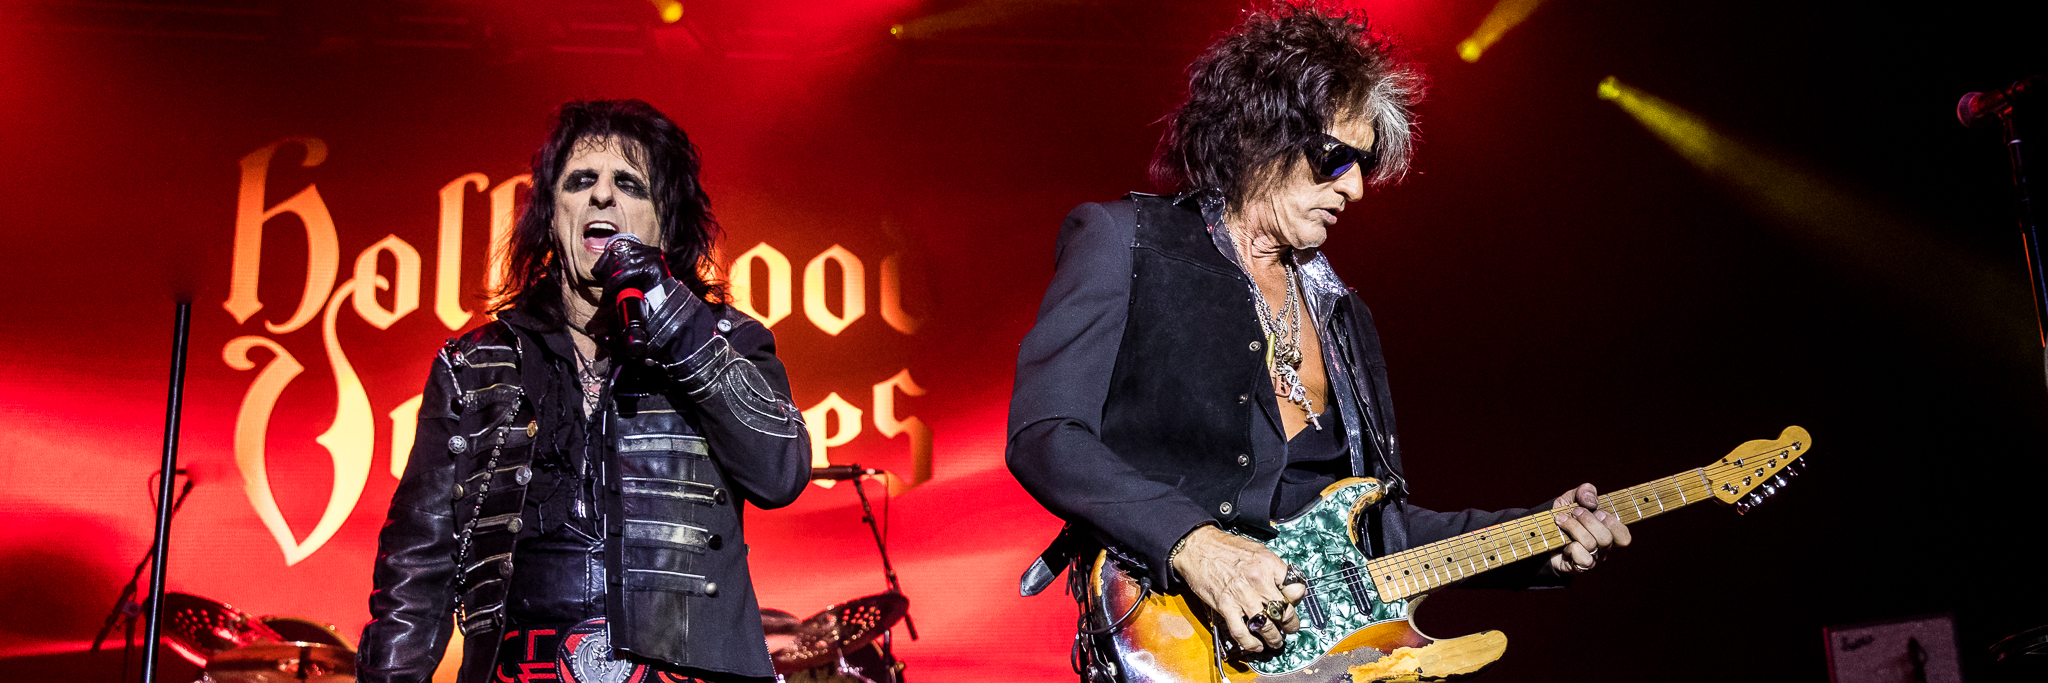 Hollywood Vampires Put On Classic Rock Clinic At Sands Event Center